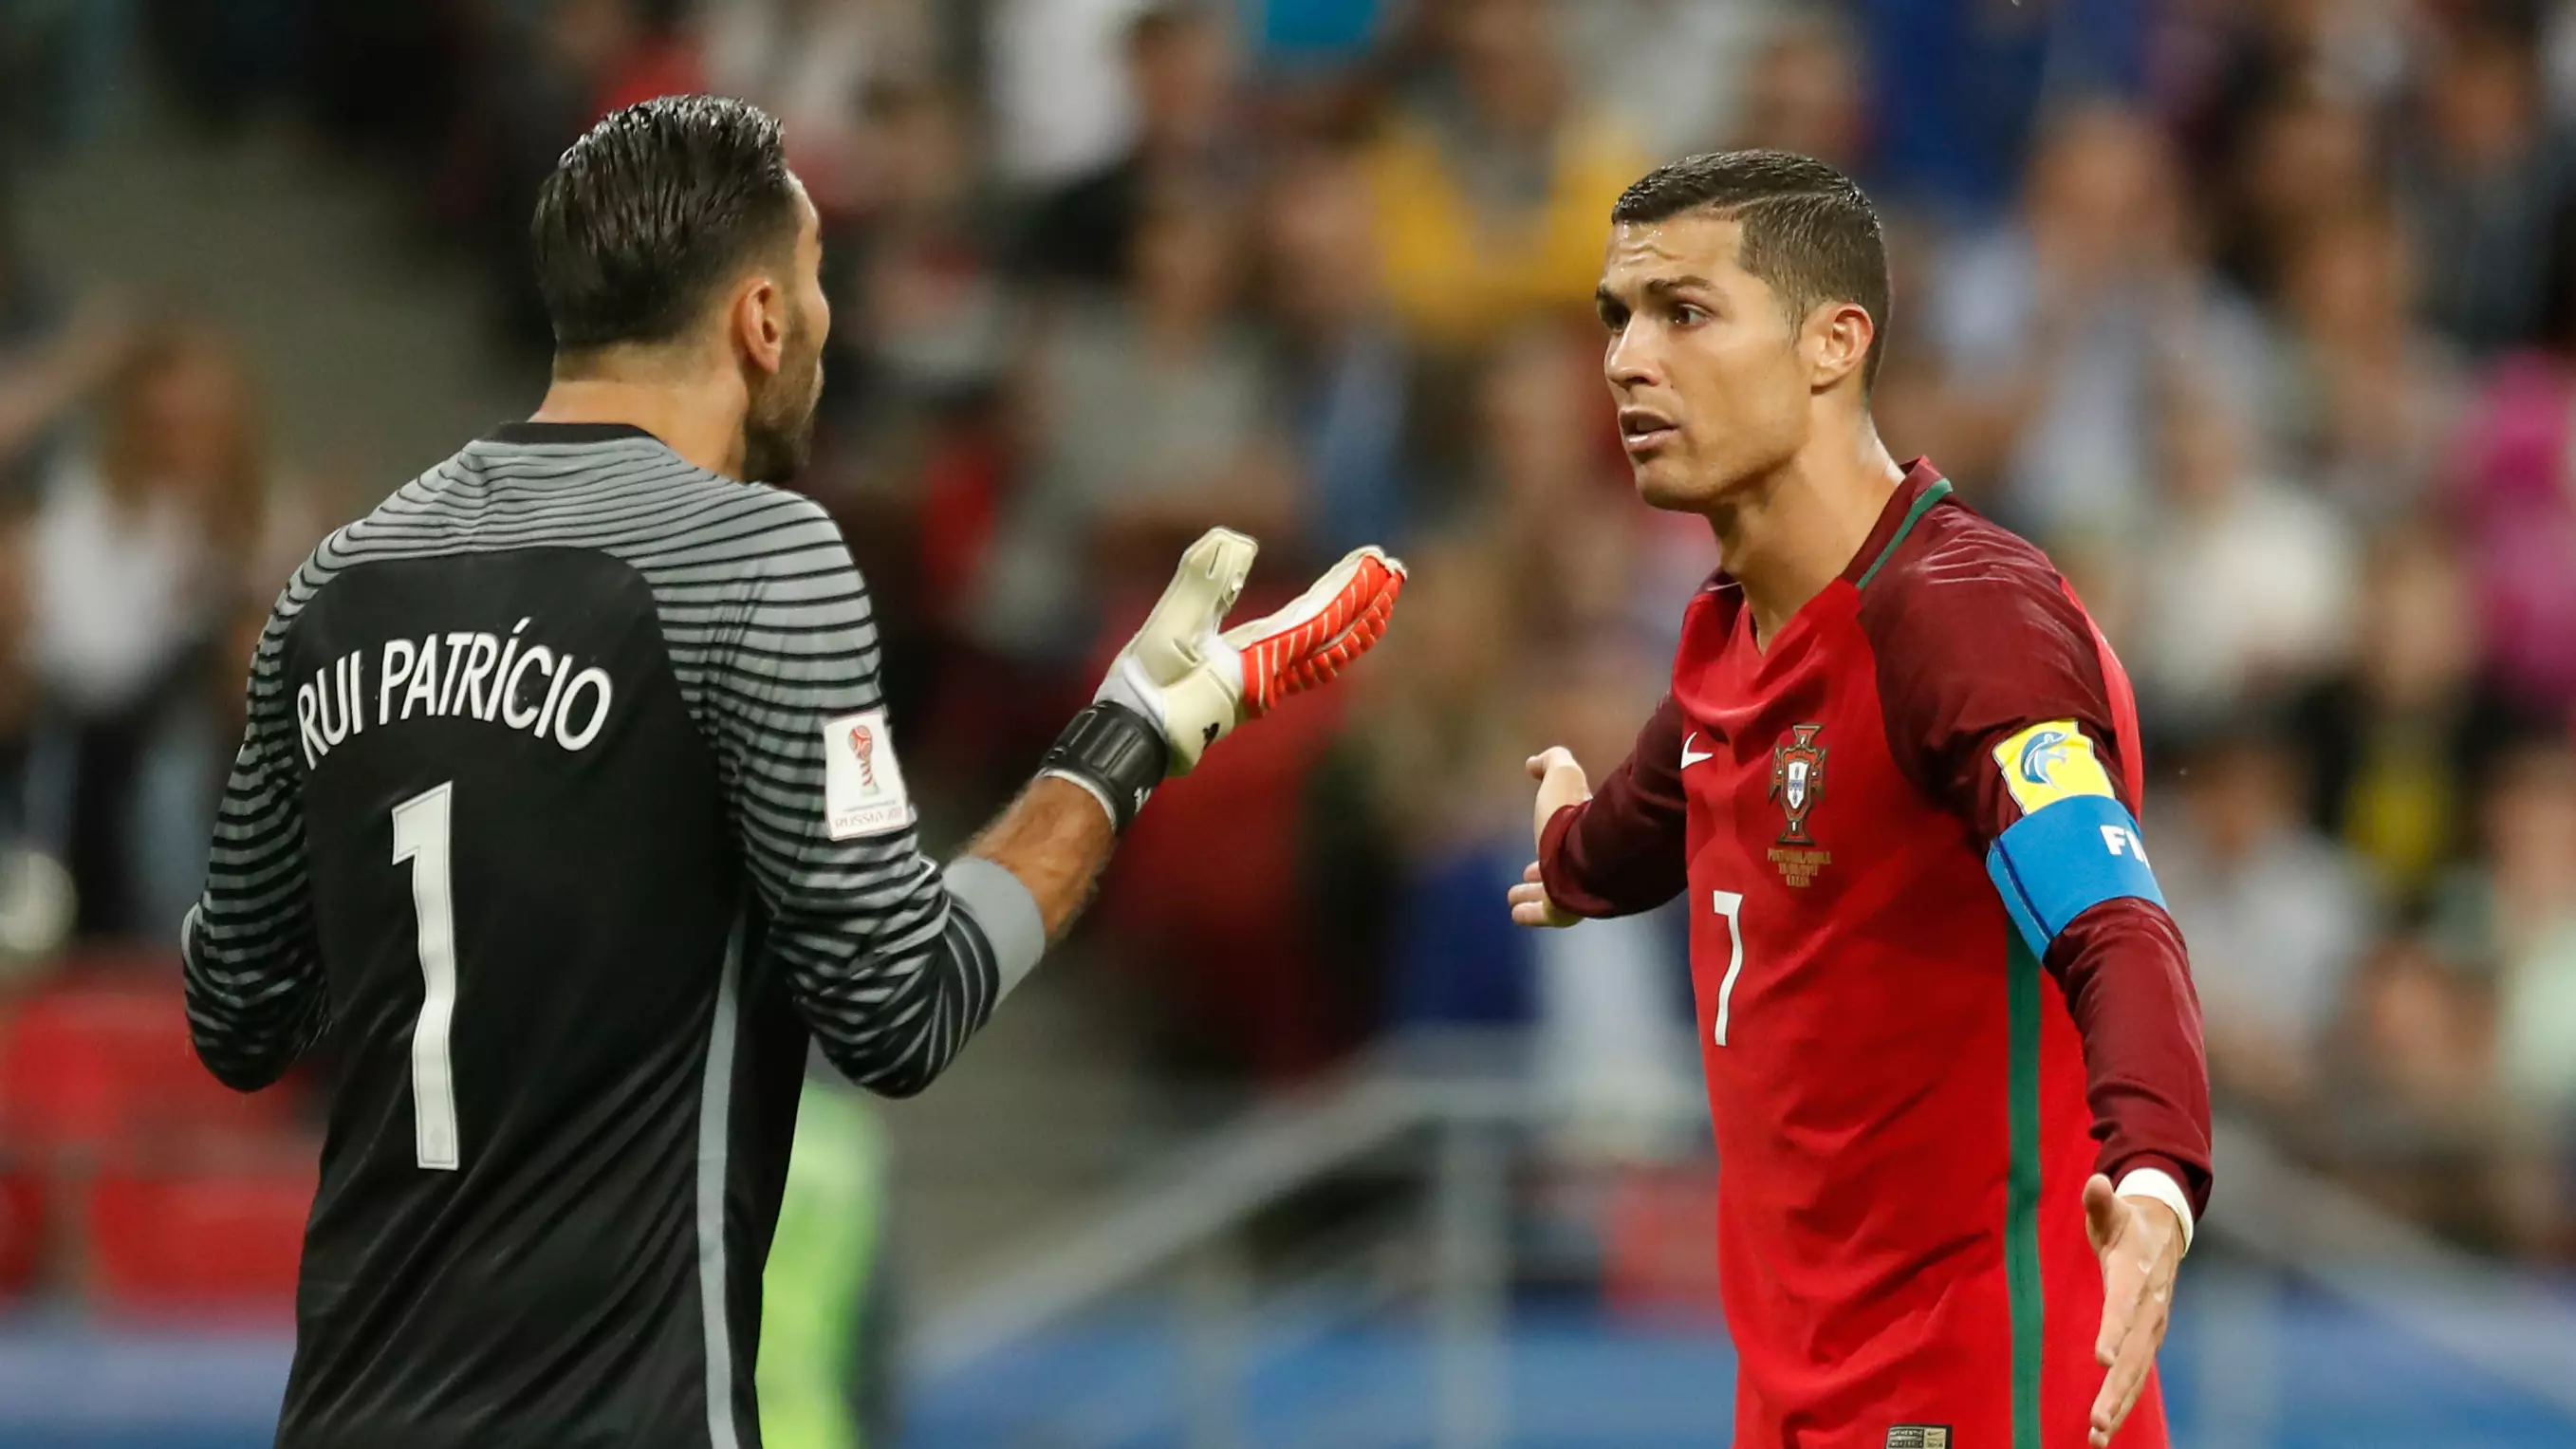 Cristiano Ronaldo Criticised For Being Fifth In Line For Penalties